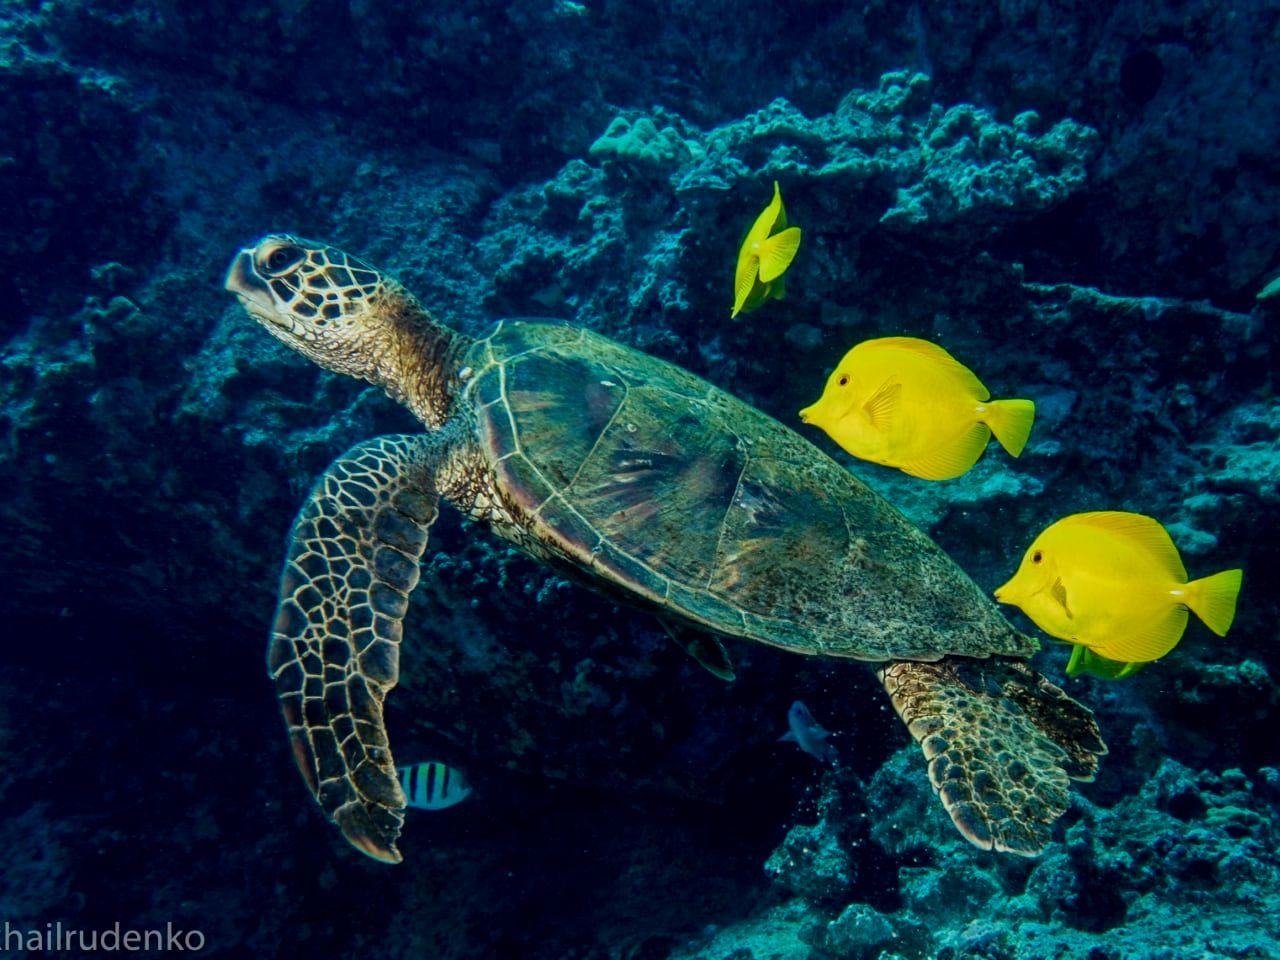 a green sea turtle is surrounded by yellow fish in the ocean